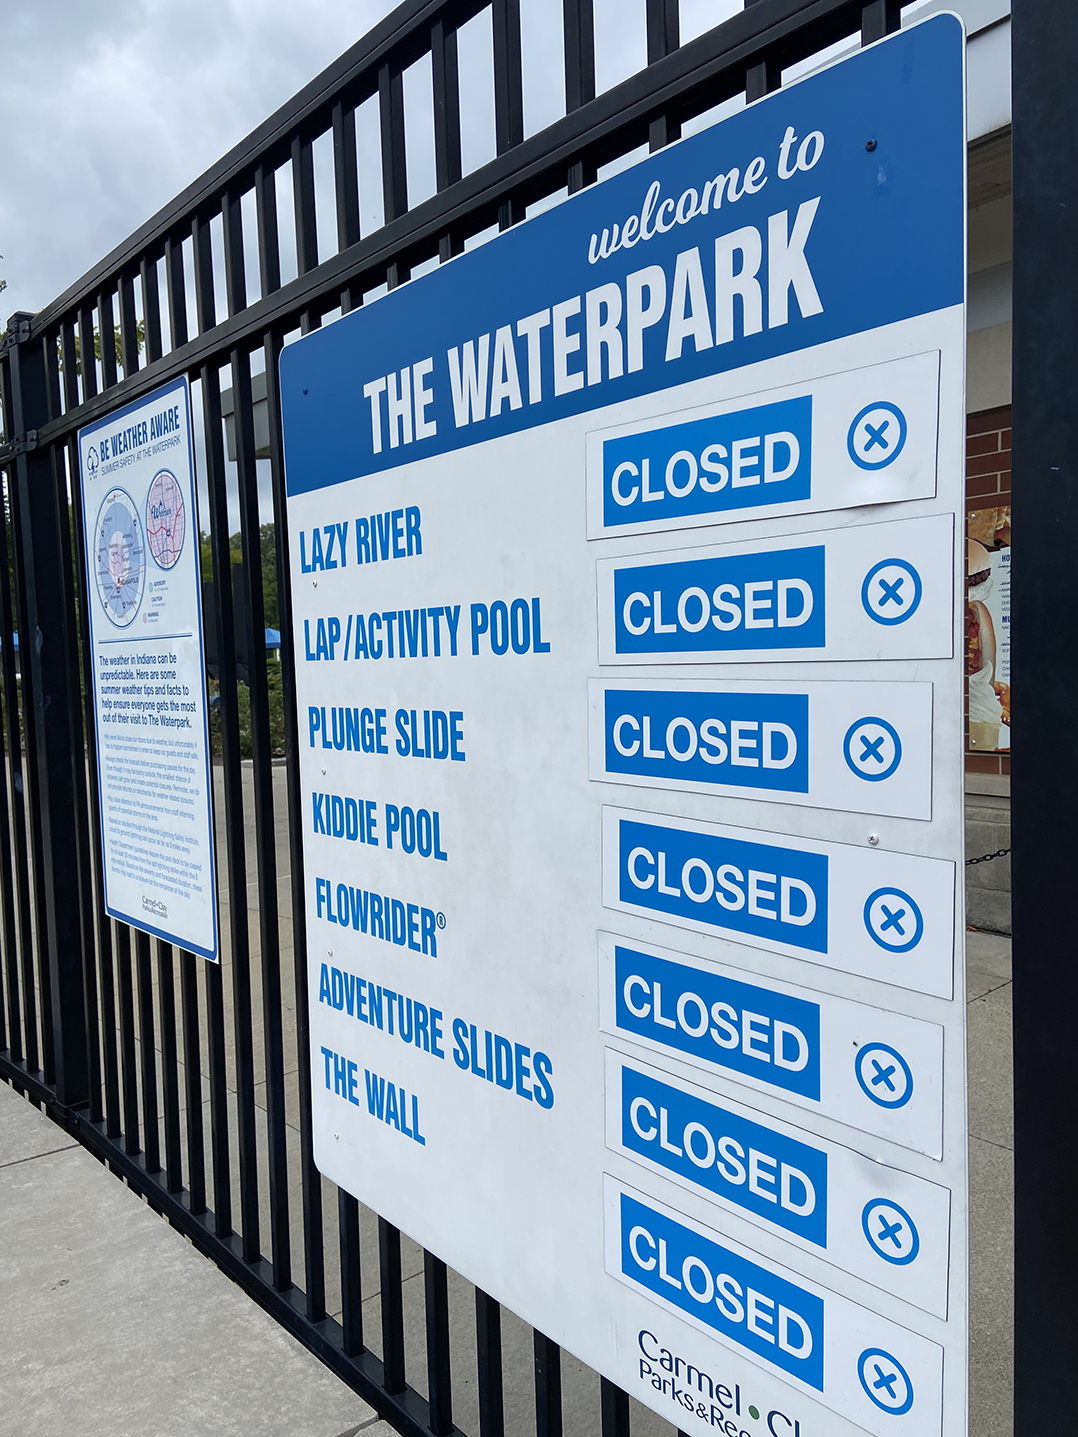 Changing school calendars lead to shorter swim seasons at The Waterpark